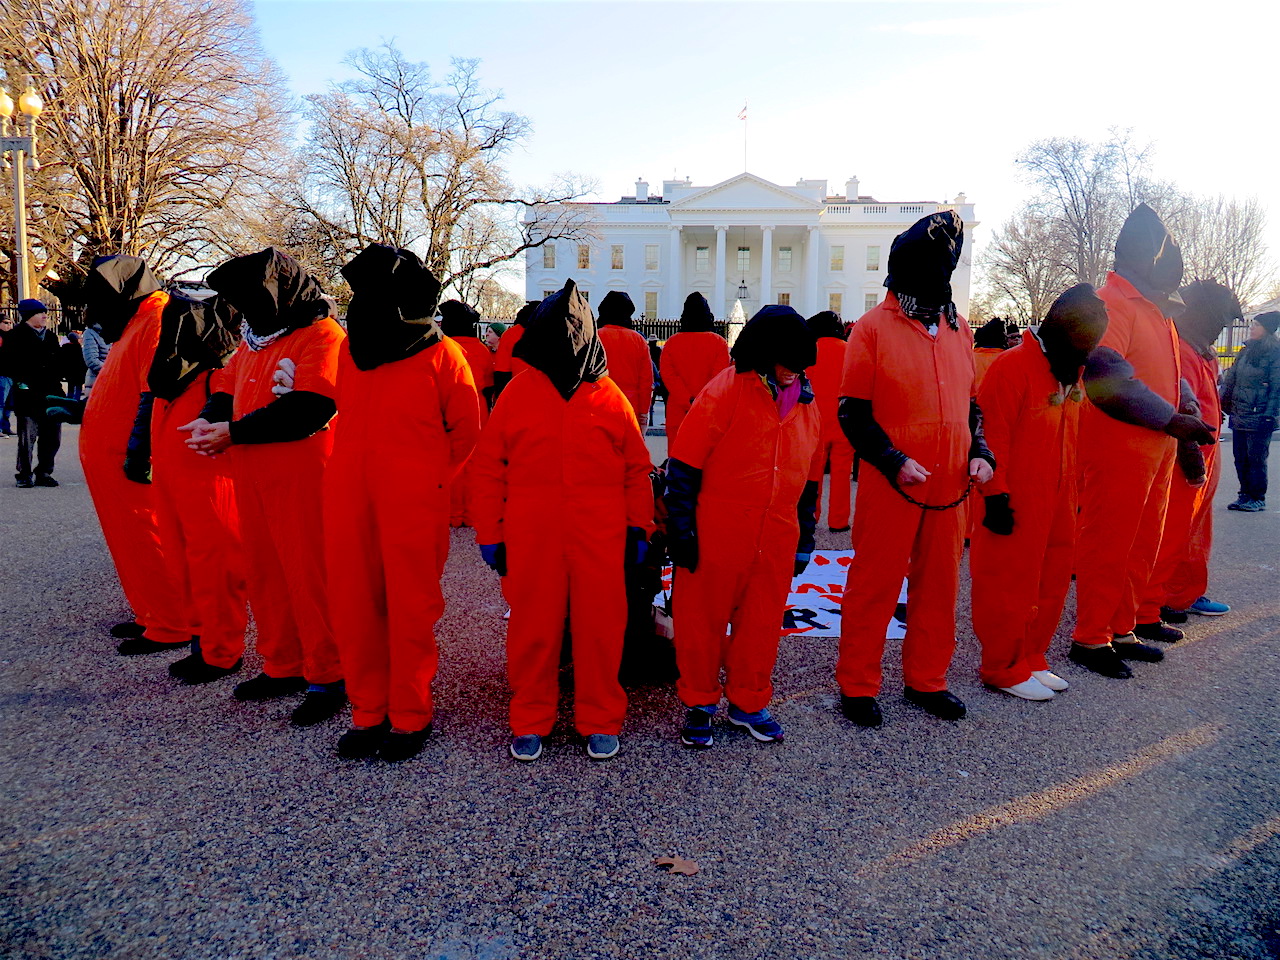 Witness Against Torture campaigners form a circle outside the White House towards the end of the annual vigil calling for the closure of Guantanamo, on January 11, 2019 (Photo: Andy Worthington).